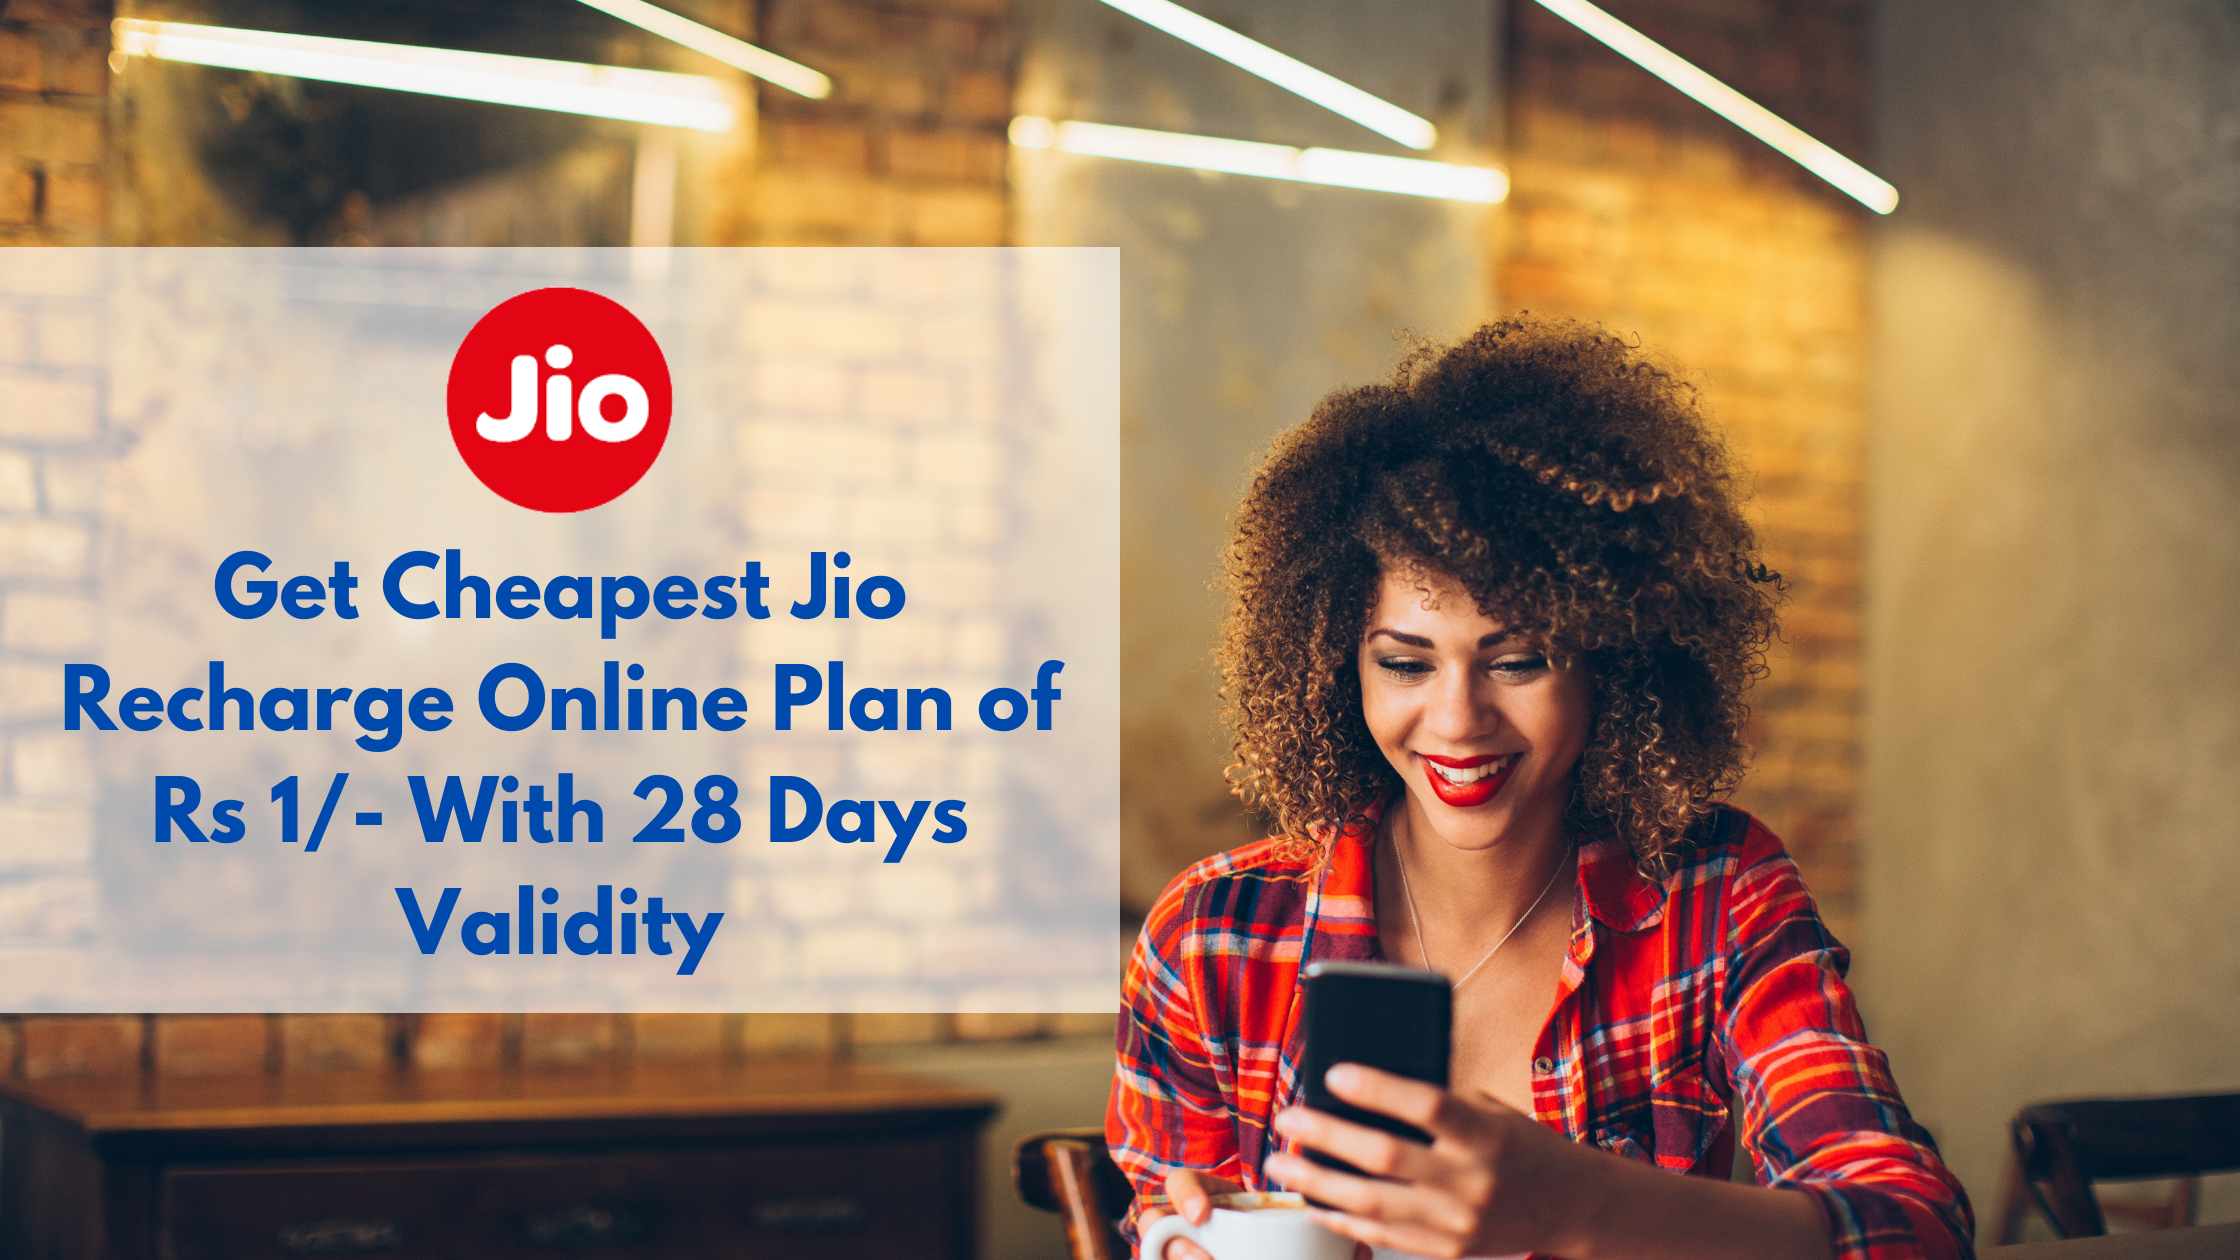  Get Cheapest Jio Online Recharge Plan of Rs 1/- With 28 Days Validity